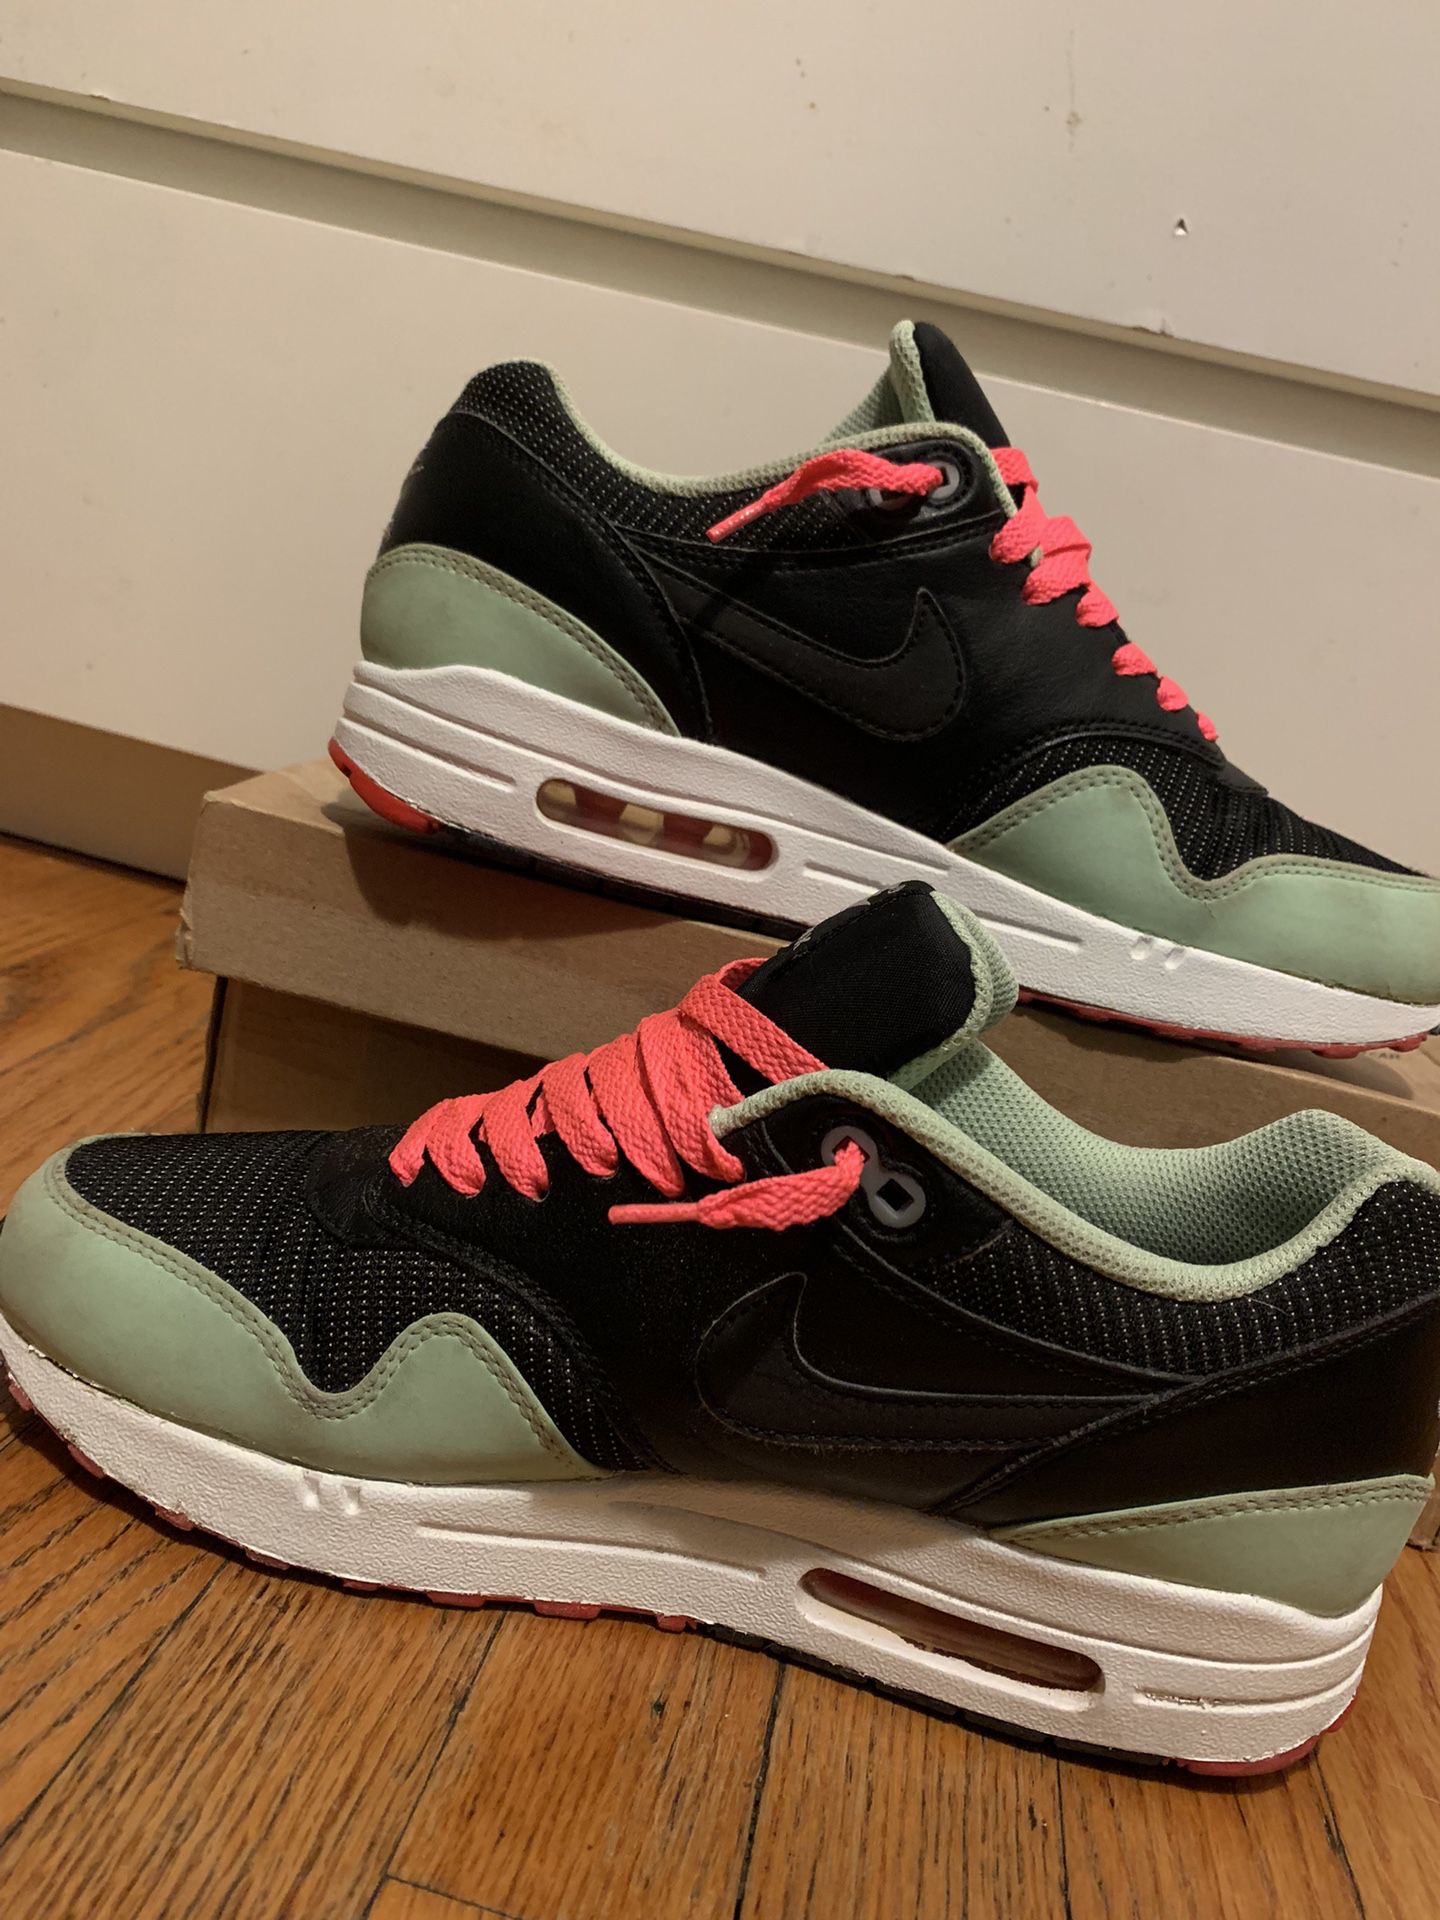 2013 Nike Air Max 1 FB “Yeezy” OG for Sale in Queens, NY -